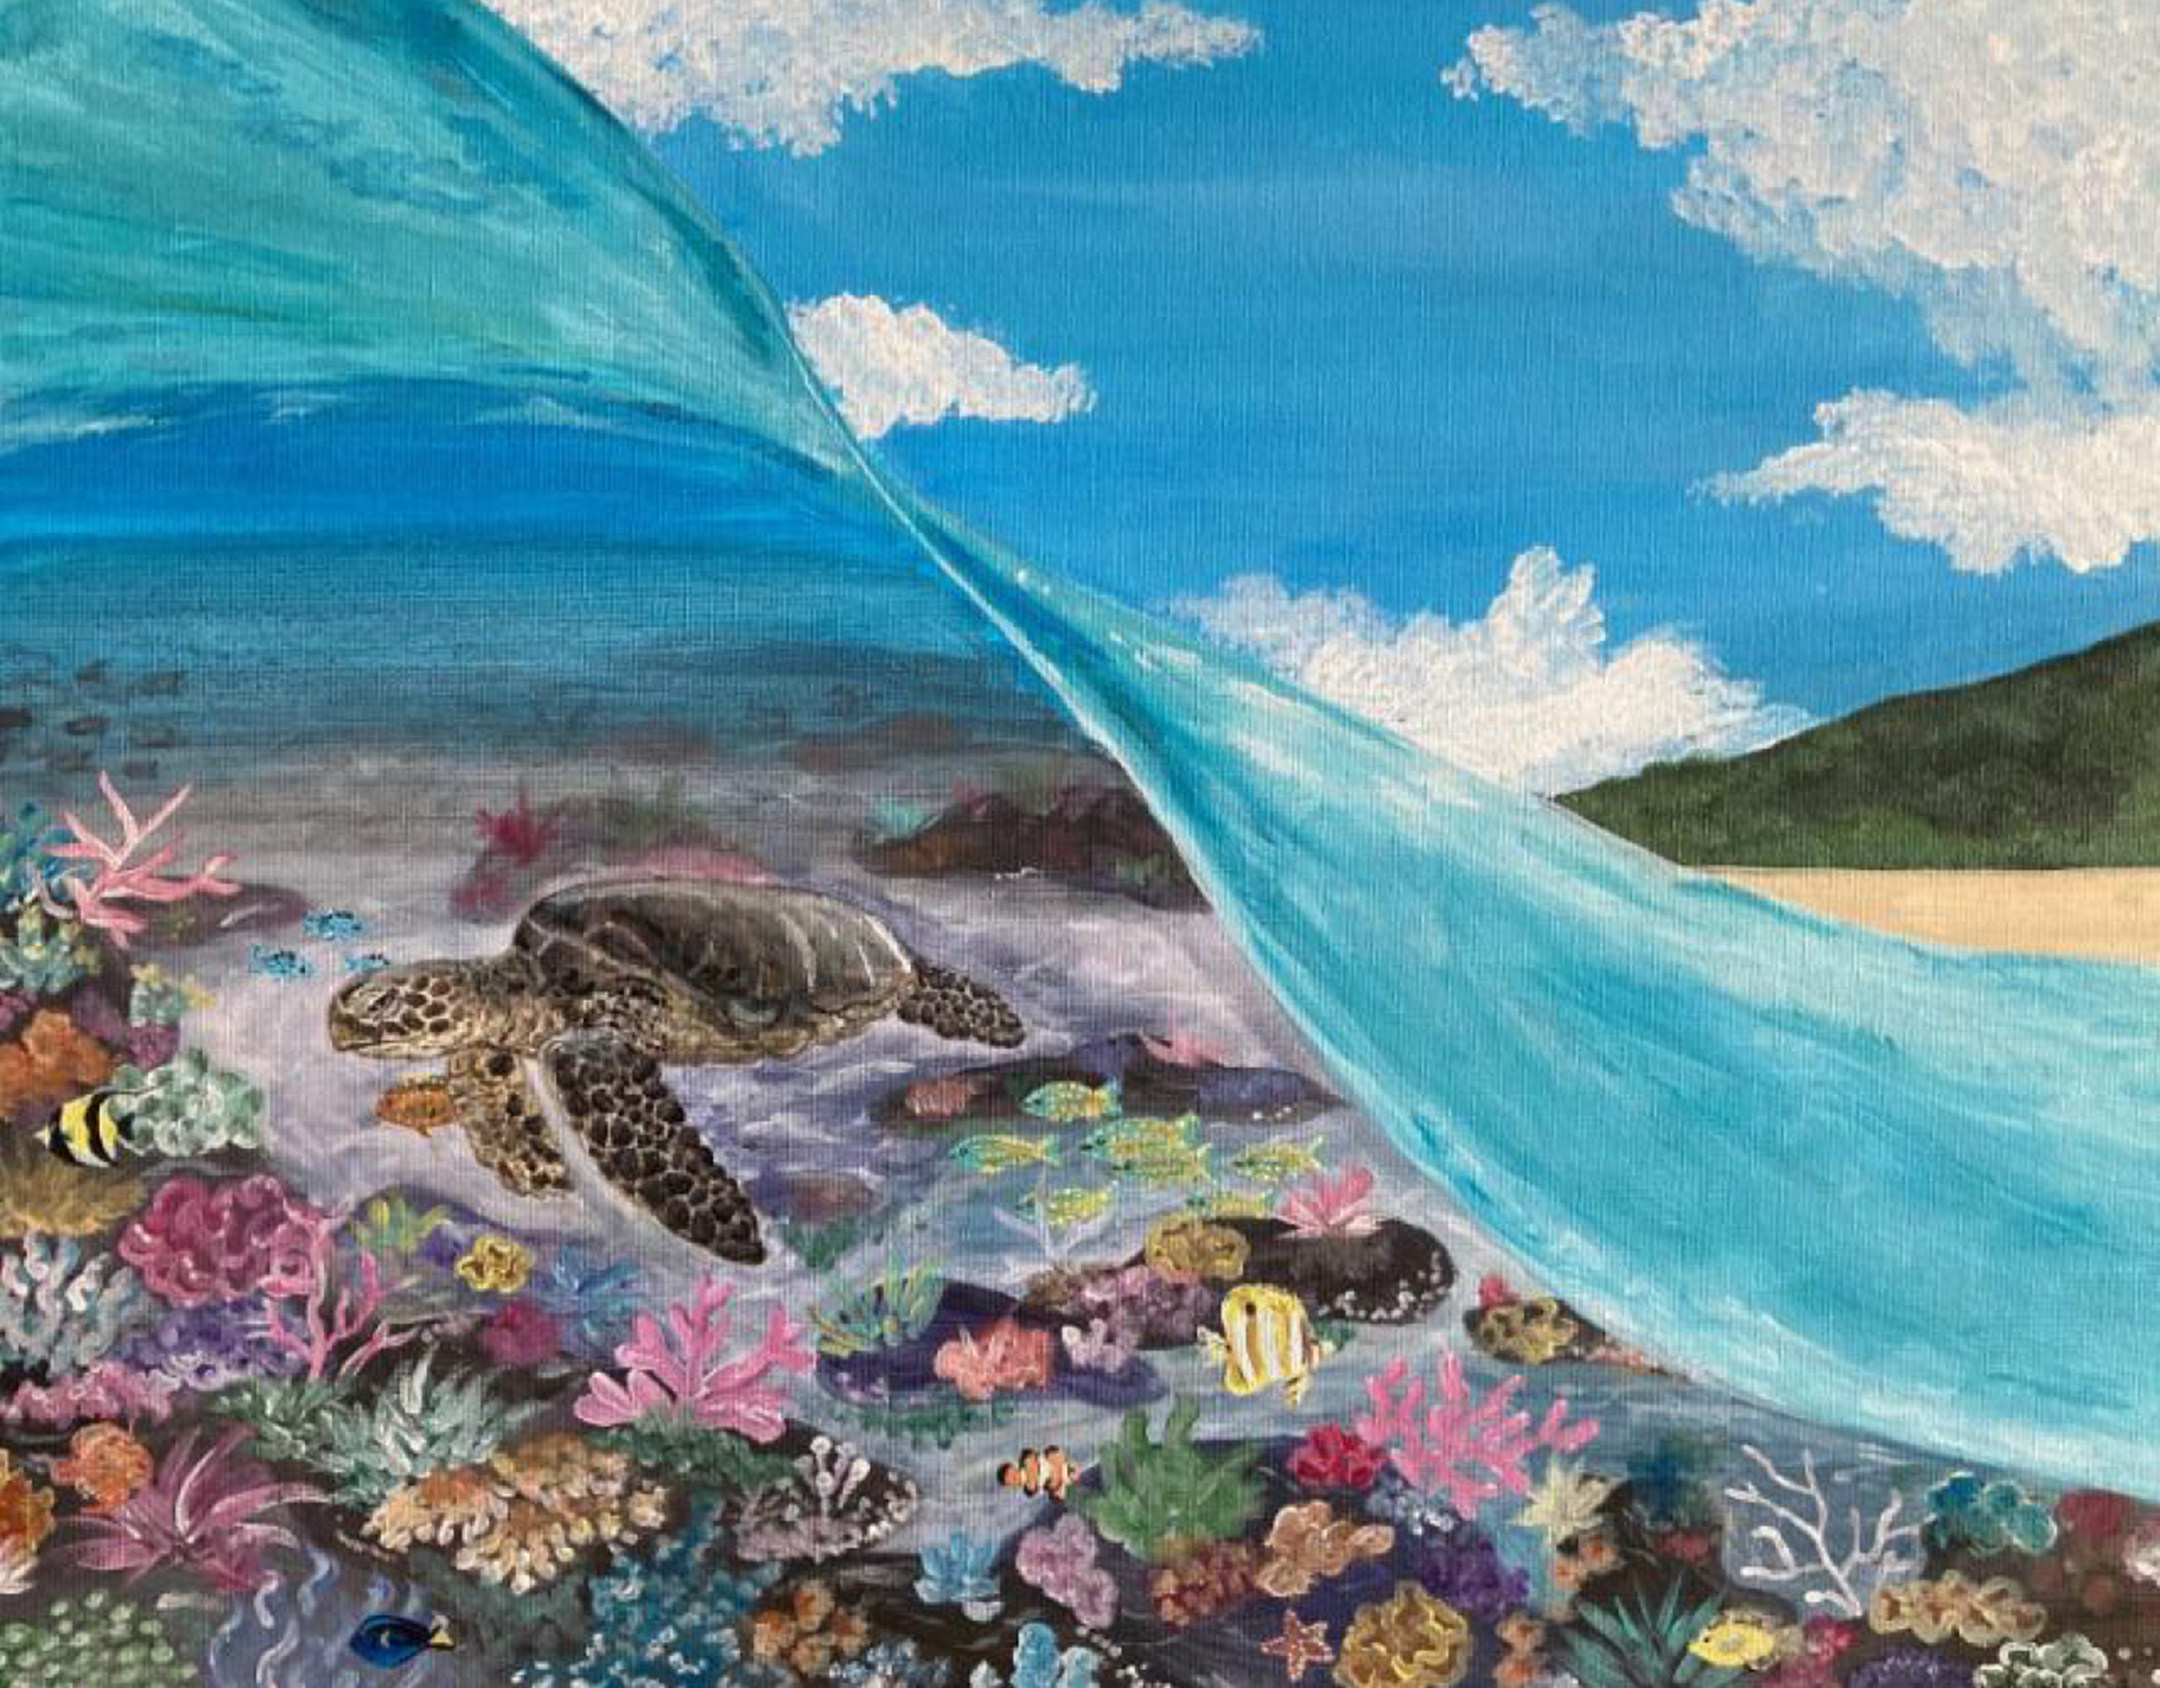 Painting of a turtle swimming in a coral reef